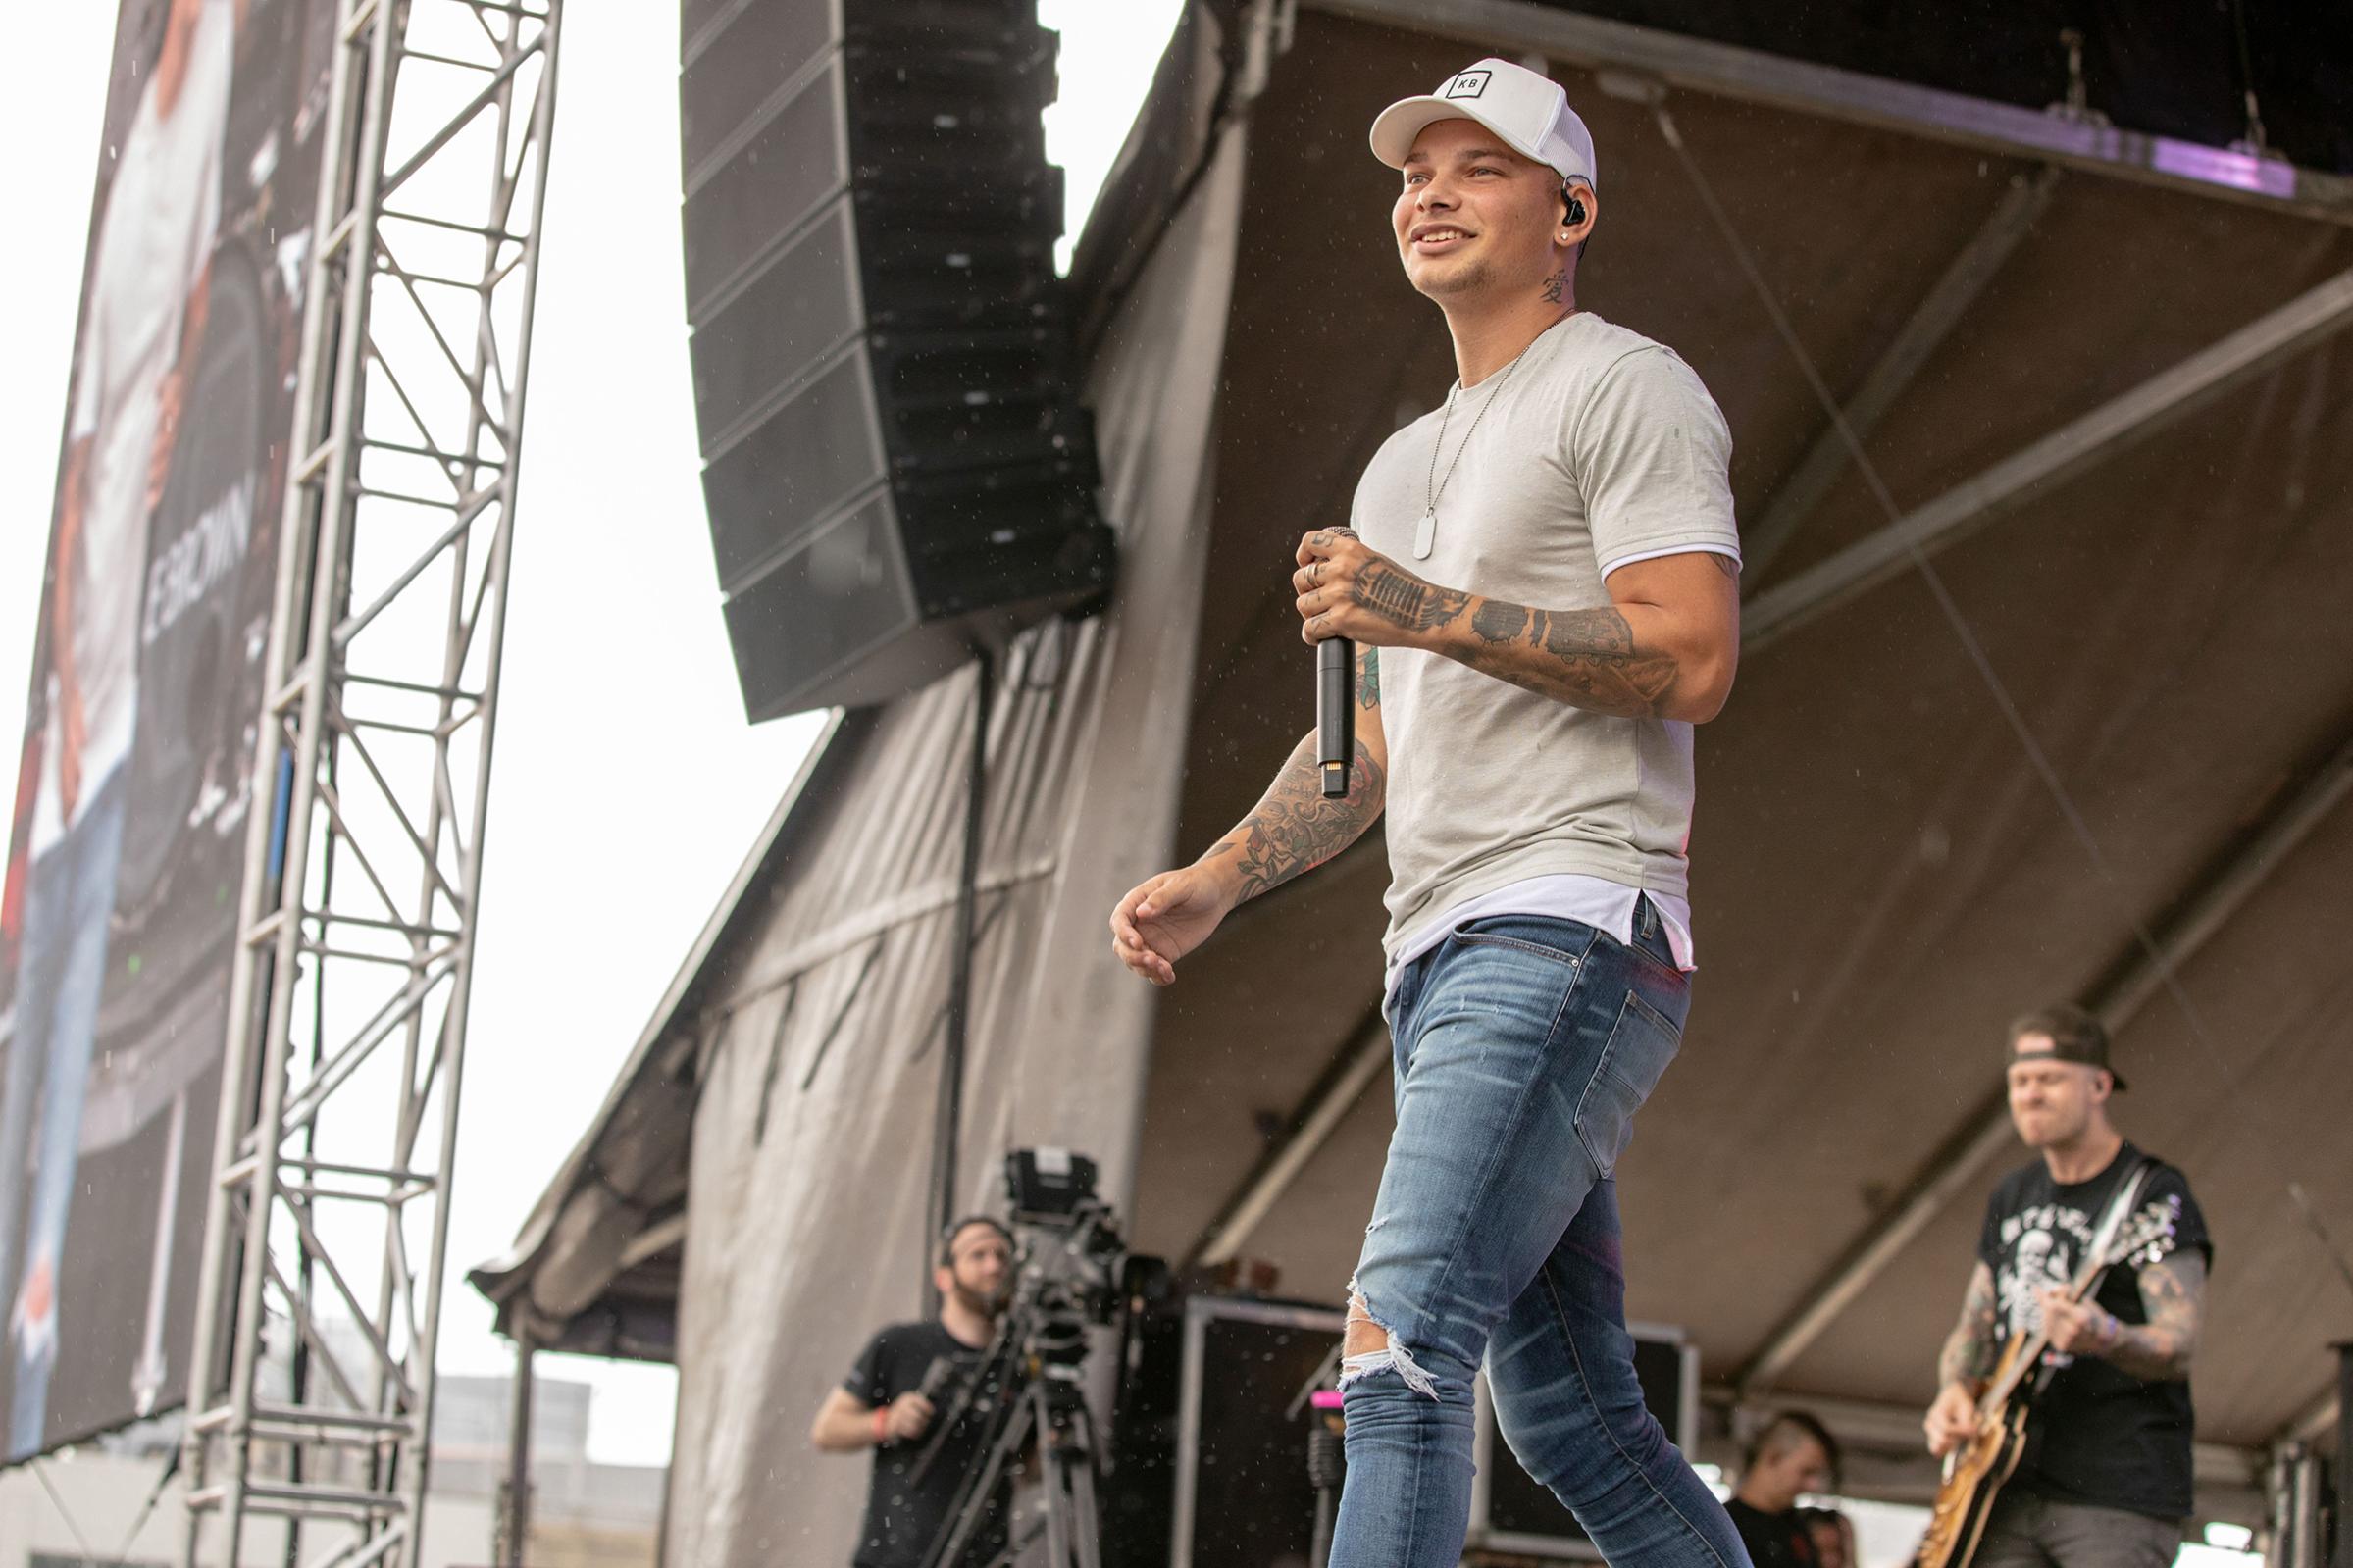 Kane Brown performs at the Windy City Smokeout Festival on July 15, 2018 in Chicago.